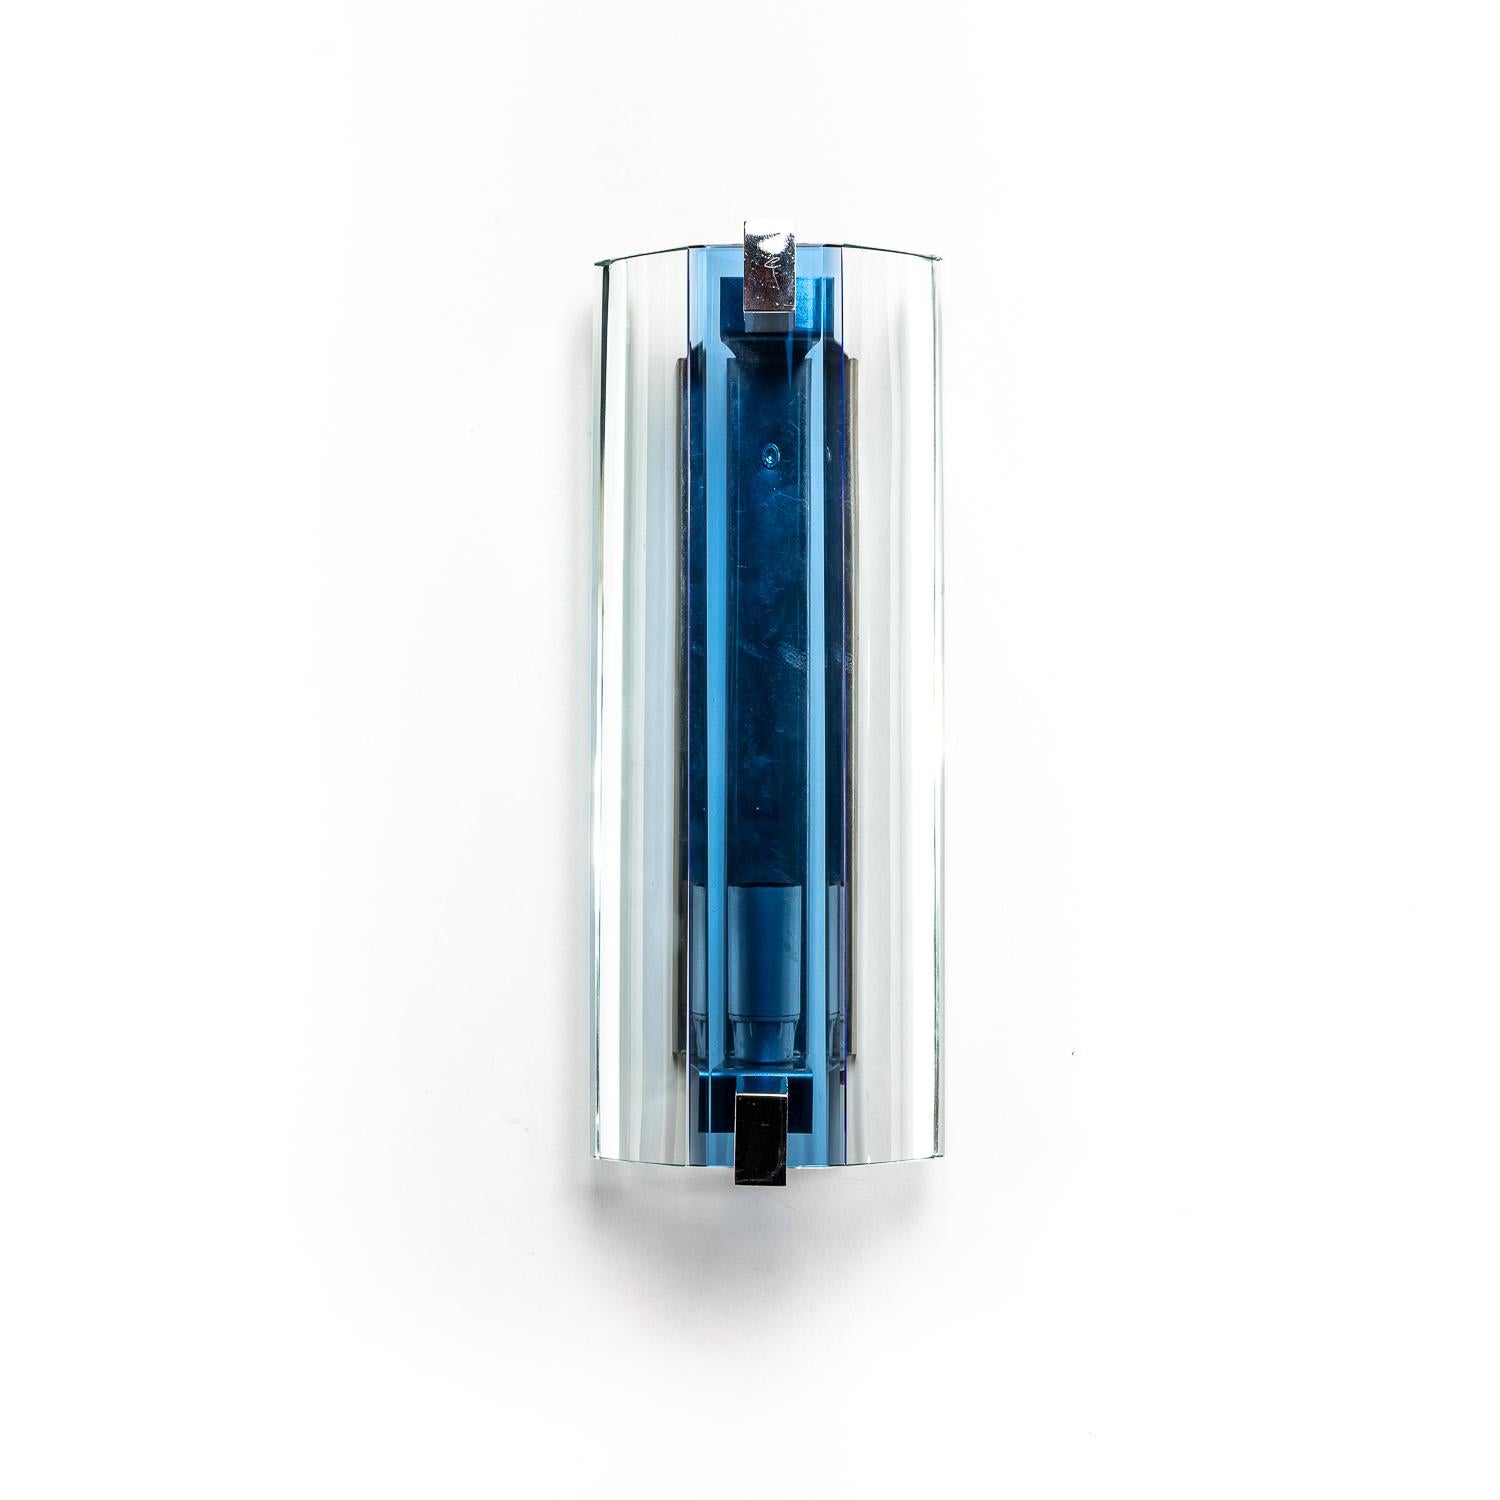 This original Veca set brings a design edge to any space. The brass and chrome combination feels modern and sharp, and this is emphasized by the blue glass cover. These lights are in great condition and come with their original Veca stickers.